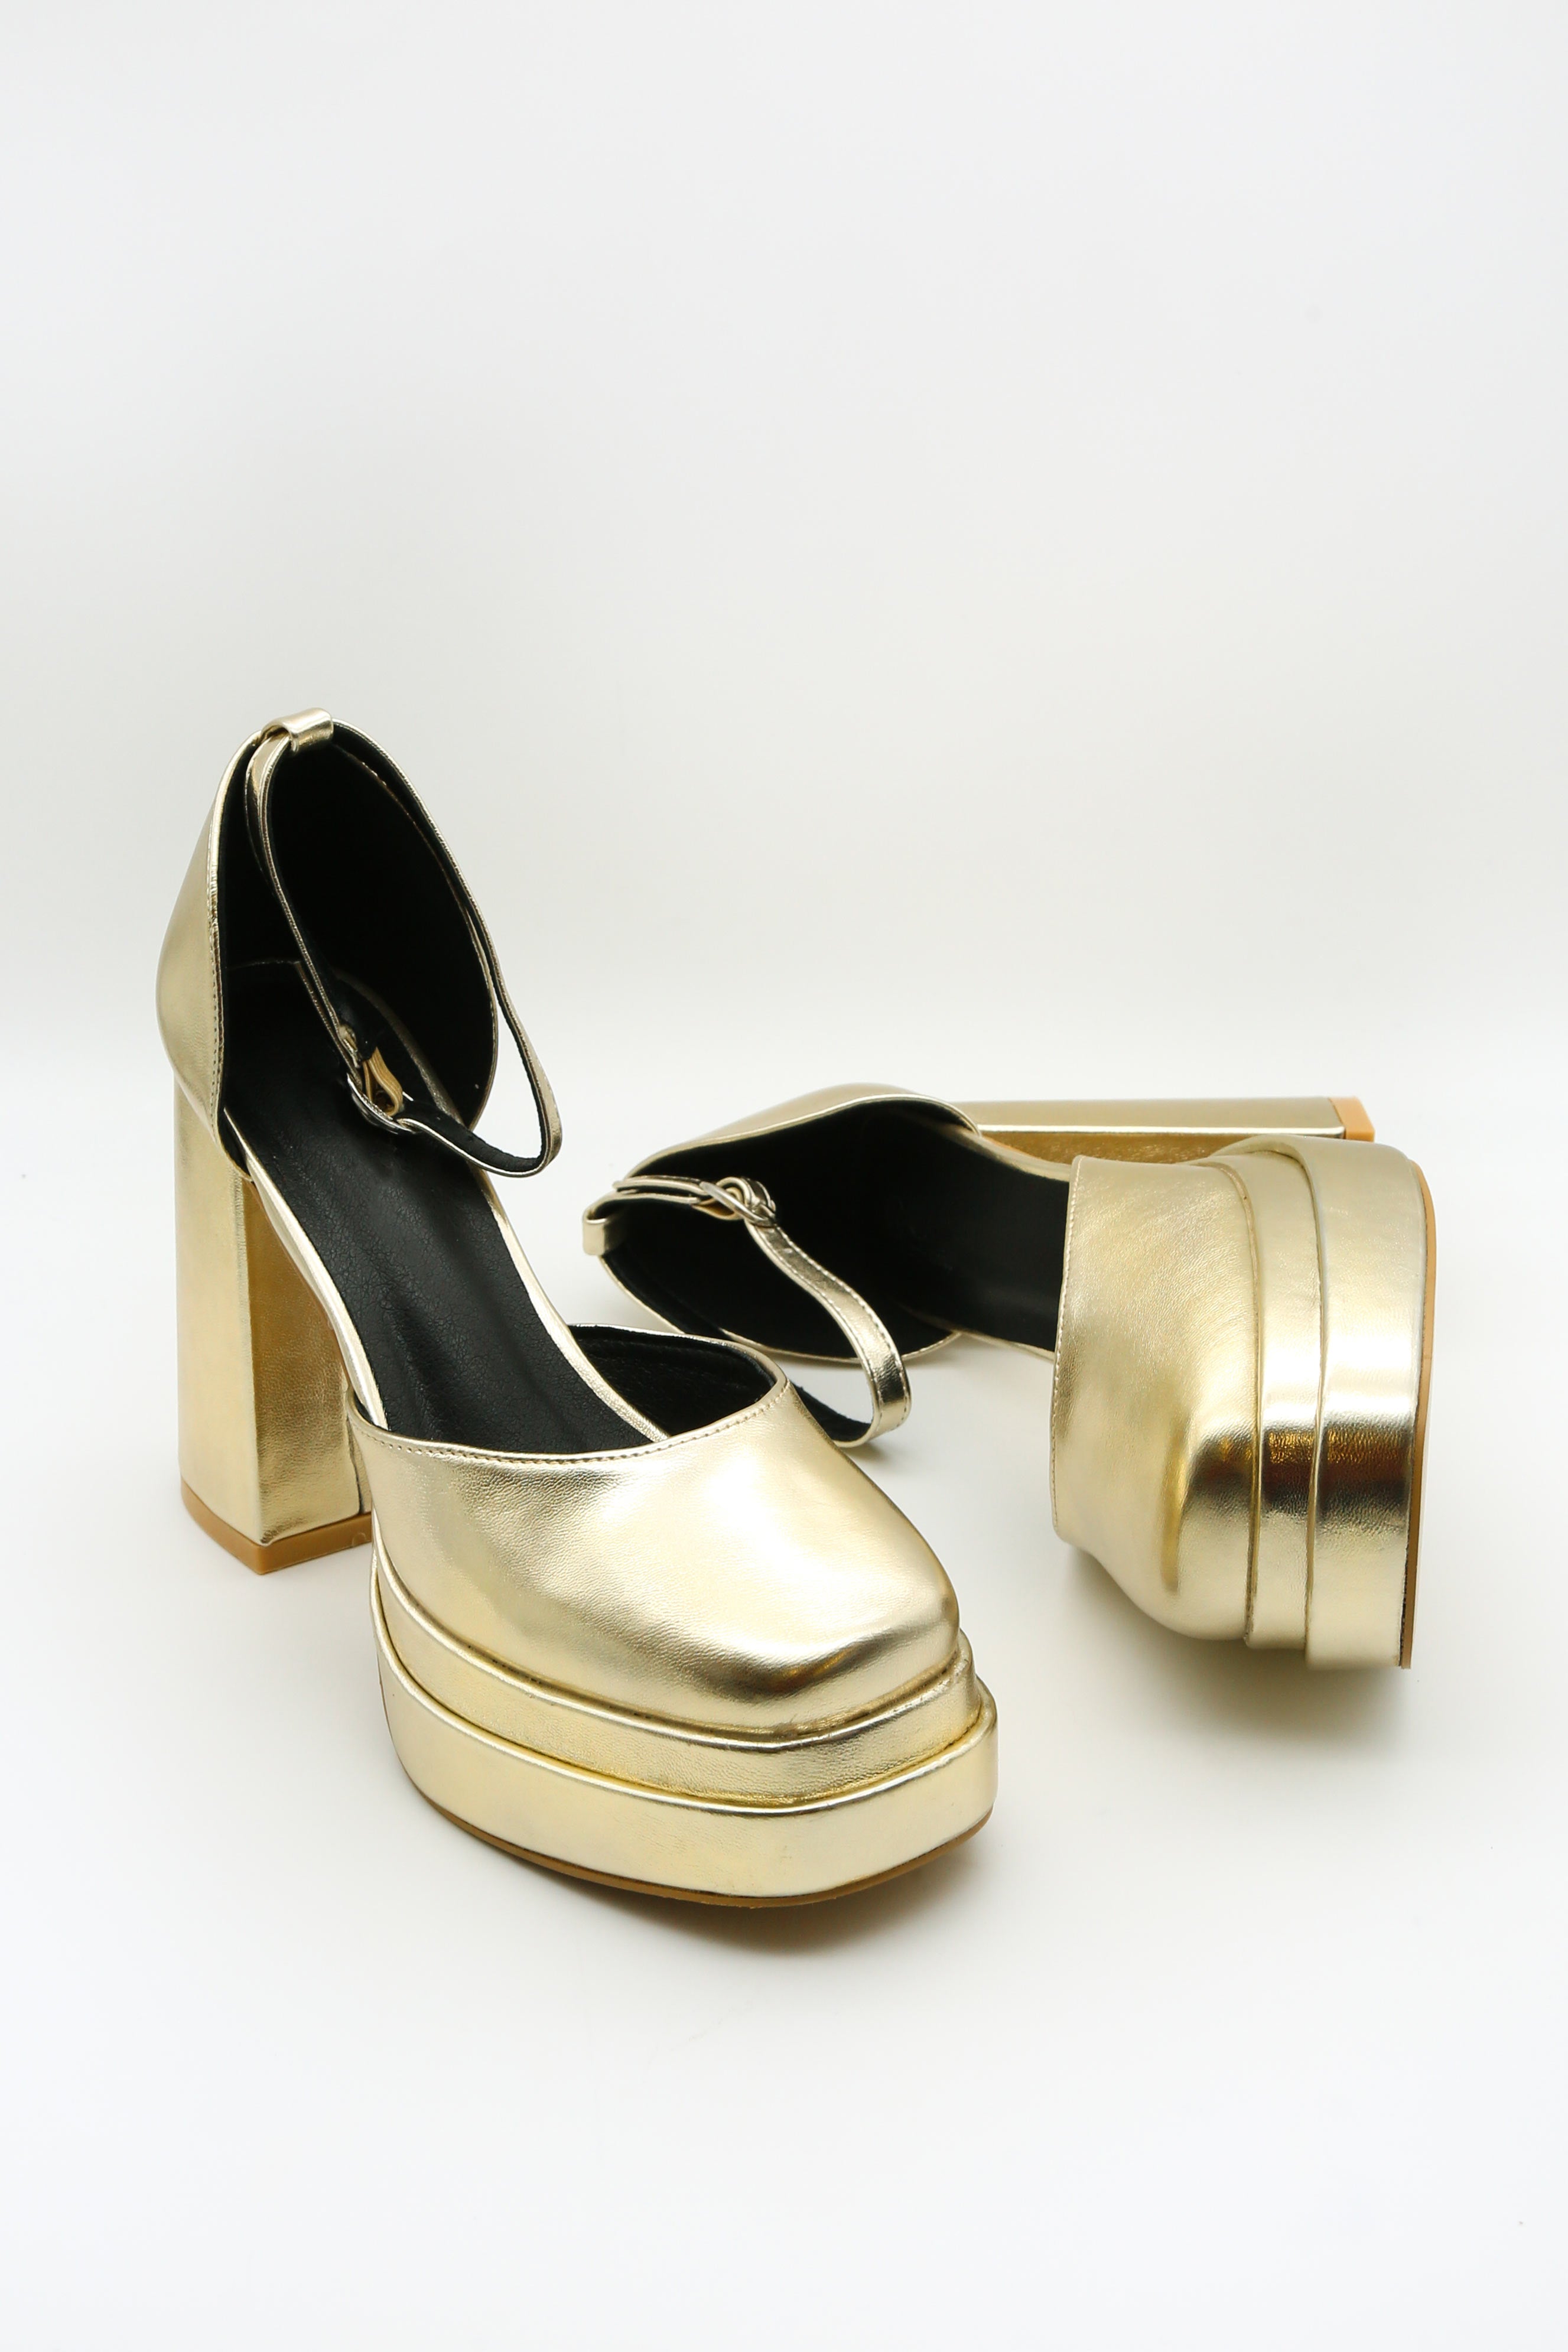 Gold Strappy High Heels - Knotted High Heels - Gold High Heels - Lulus